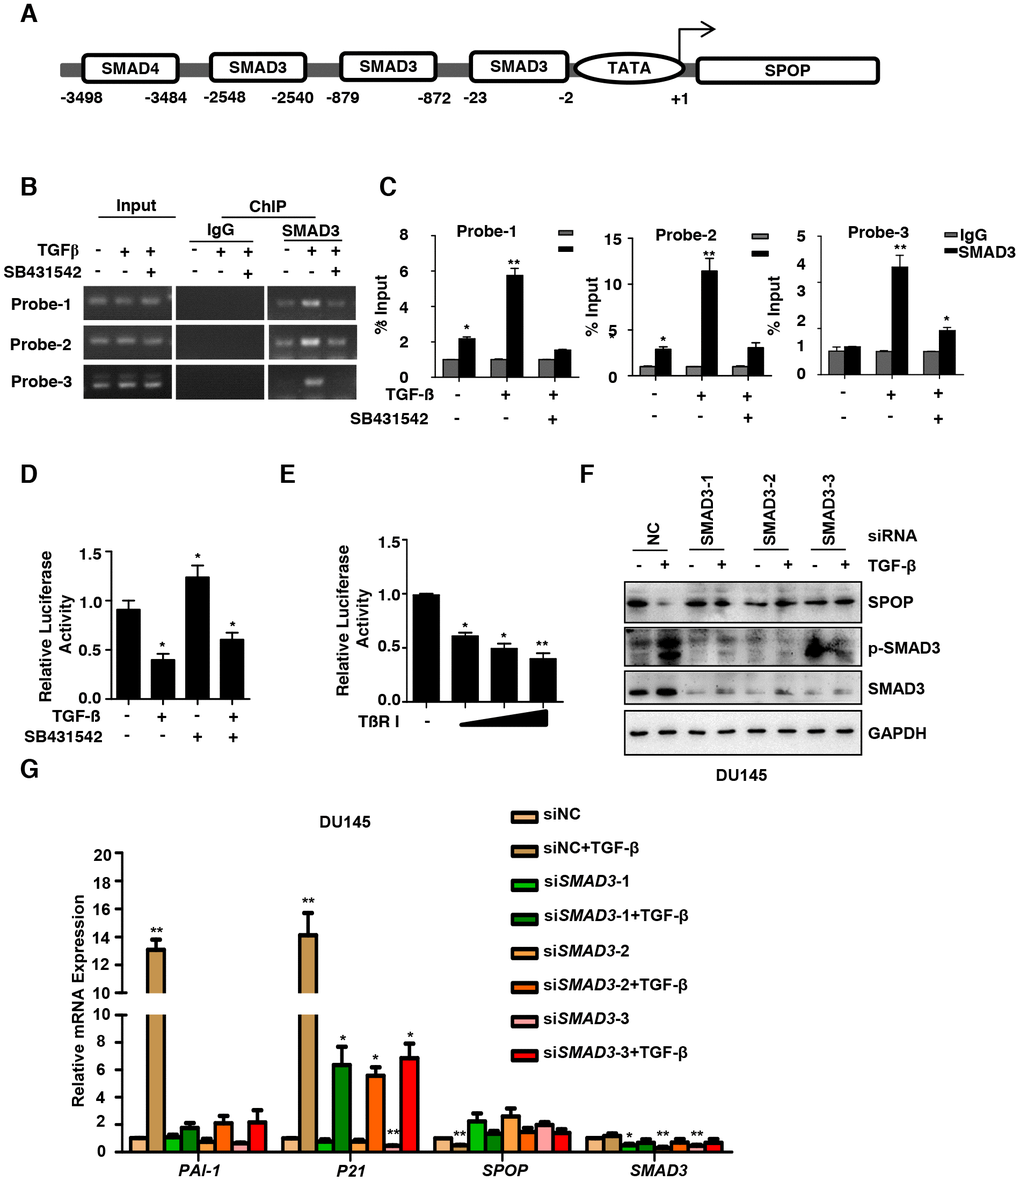 TGF-β regulates SPOP expression through SMAD3. (A) Map of the SPOP promoter and the putative SMAD3-binding sites. (B) ChIP–PCR analysis of DU145 cells cultured with TGF-β (10ng/ml) or SB431542 (10μM) for 8 hours using anti-SMAD3 antibody and PCR primers. IgG was used as a negative control. (C) Enrichment of SMAD3 on the SPOP promoter was calculated. Data are means ± SEM (n=3). *PP t-test). (D) DU145 cells were transfected with SPOP gene basic promoter-Luc reporter. After the treatment with TGF-β (10ng/ml) or SB431542 (10μM) for 8 hours, luciferase activity of SPOP were measured. Data are means ± SEM (n=3). *Pt-test). (E) DU145 cells were transfected with TβRI or vector control, plus the SPOP basic promoter-Luc reporter. Luciferase activity of SPOP were measured. Data are means ± SEM (n=3). *PPt-test). (F, G) Western blot analysis the expression of SPOP upon the knockdown of SMAD3 and the treatment with TGF-β (10ng/ml) for 8 hrs in the DU145 cells (F) and the Real-Time PCR analysis of the expression of SPOP and TGF-β signaling-associated genes (G).